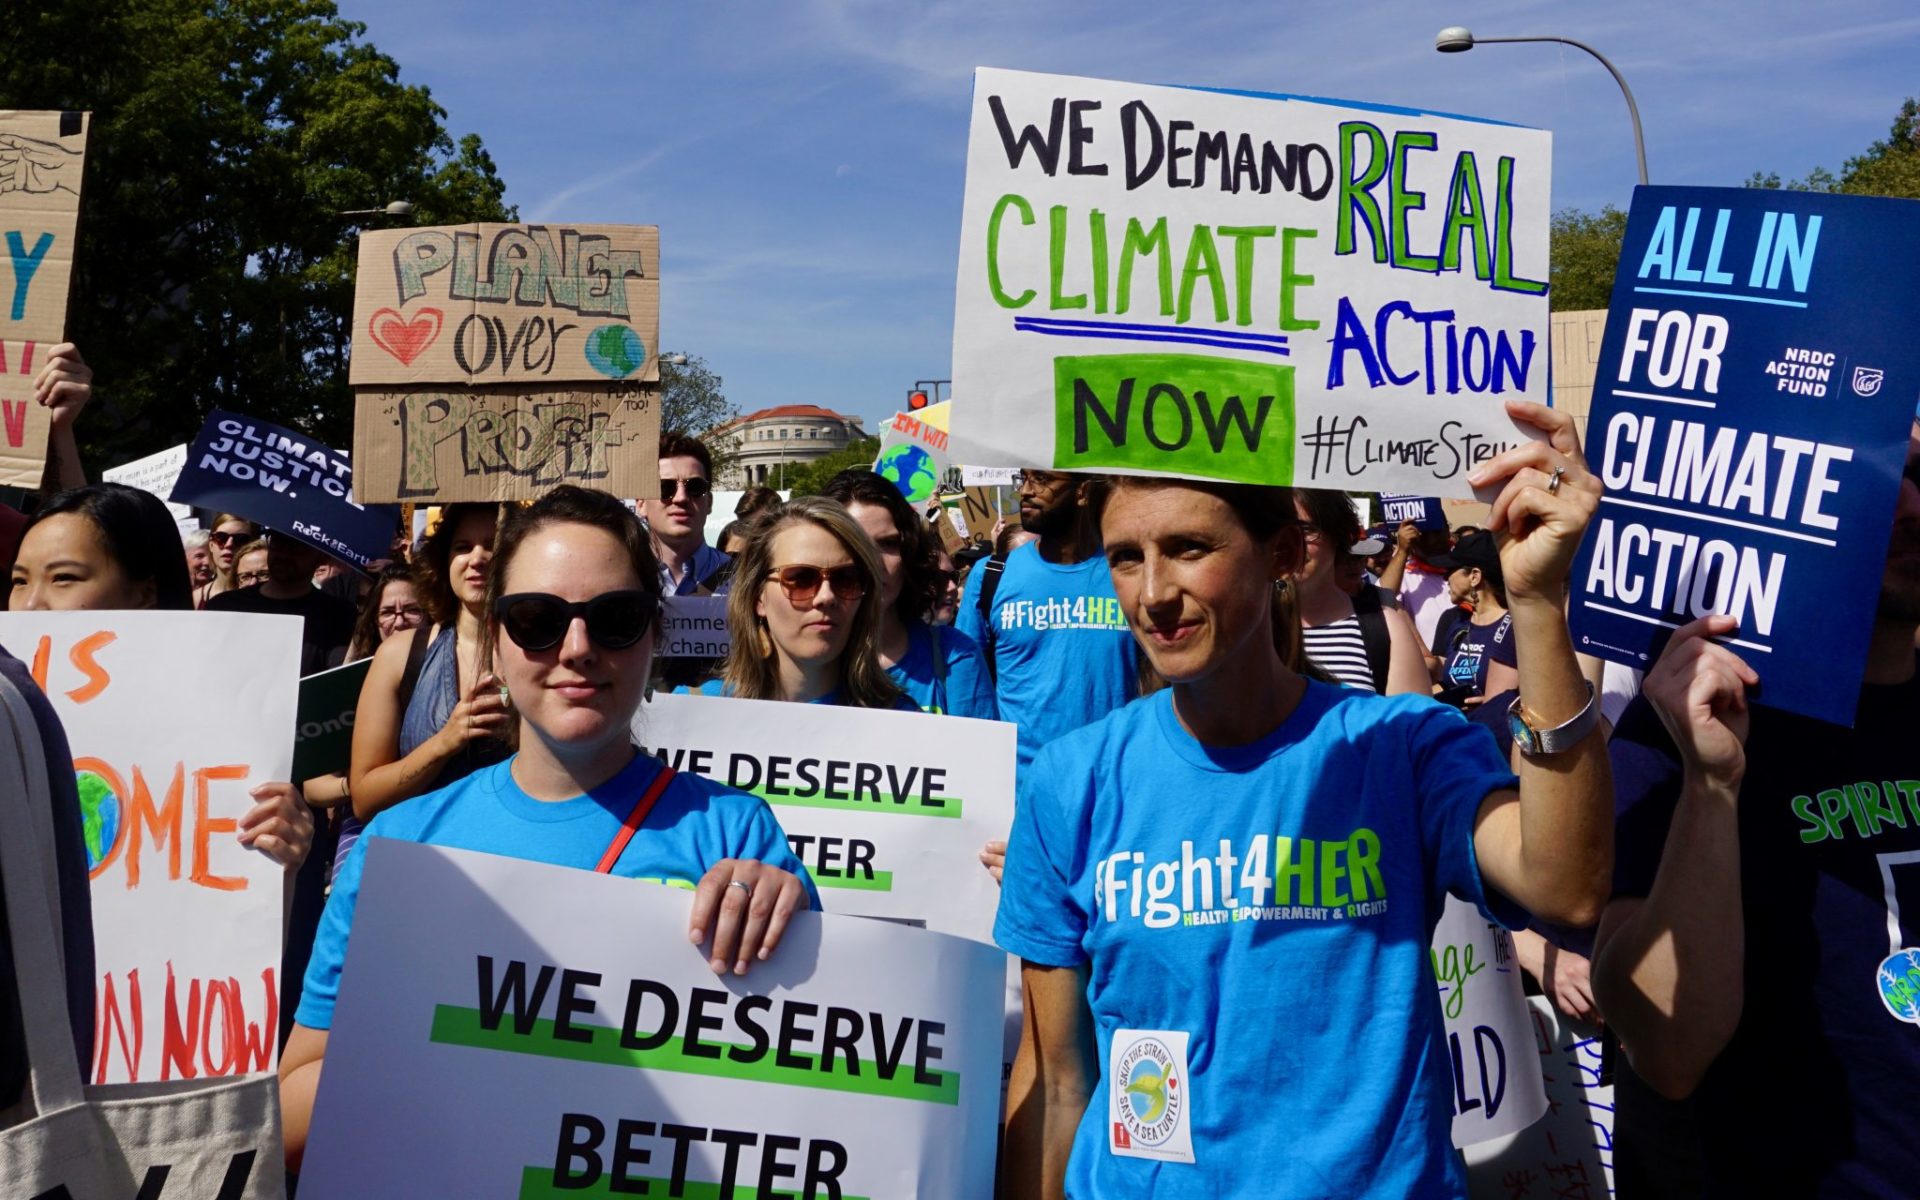 A group of young demonstrators holding signs while marching at a climate change rally